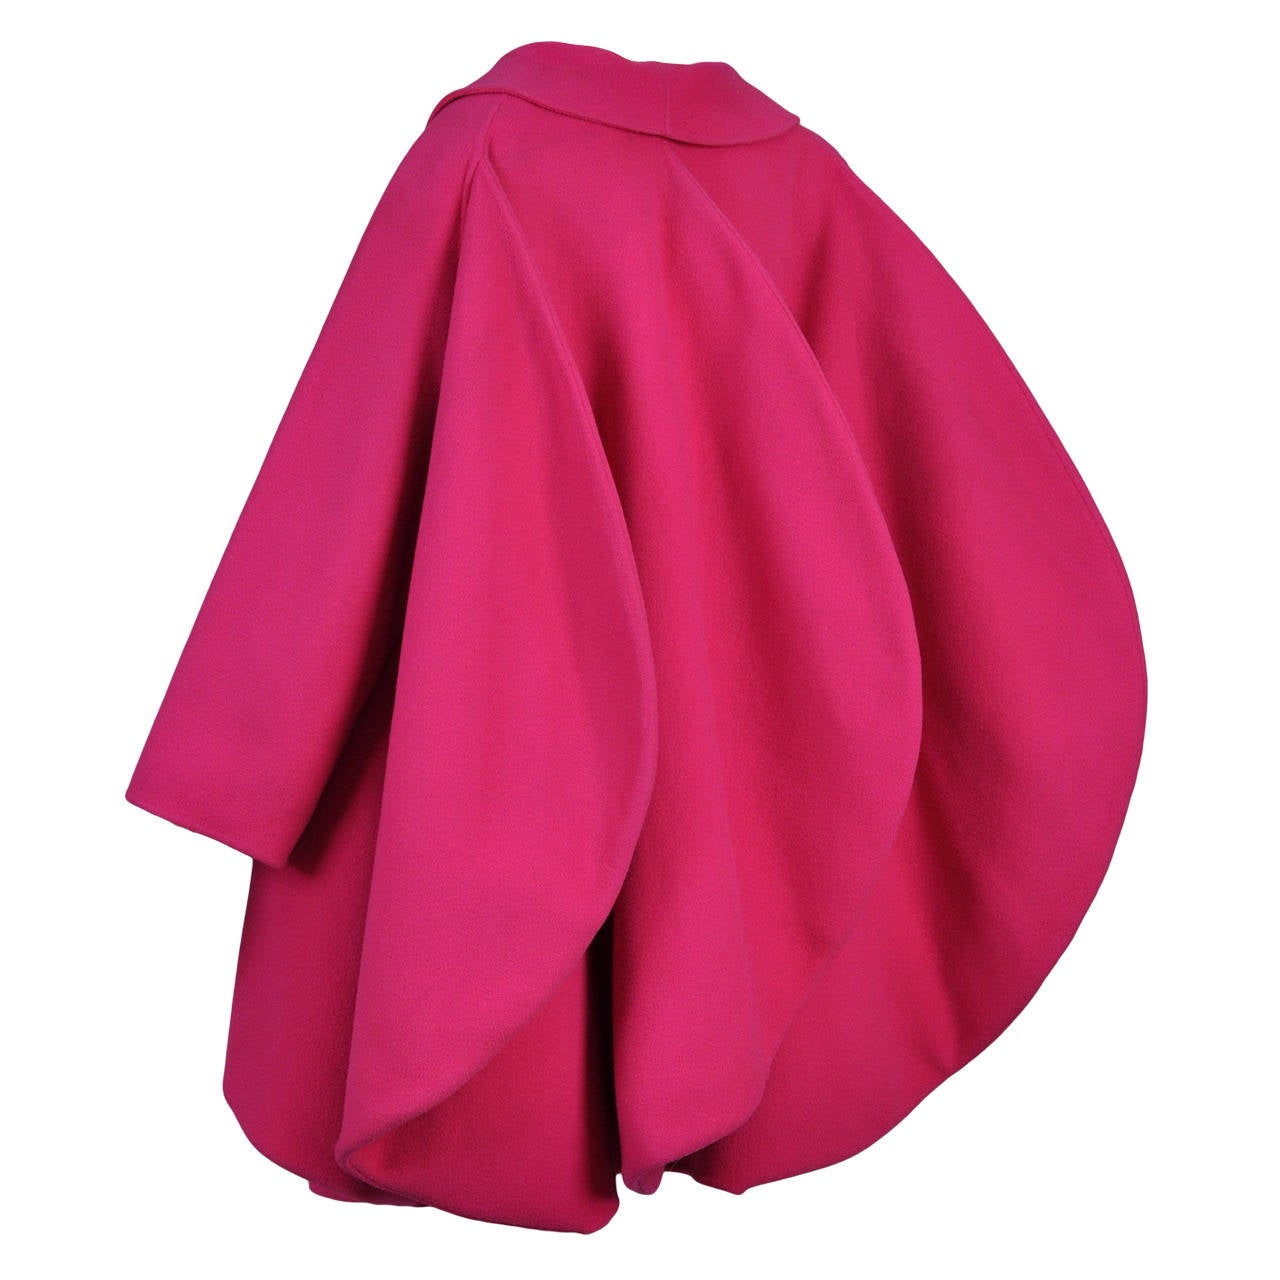 Iconic 1987 Pierre Cardin Haute Couture Fin-Backed Coat For Sale